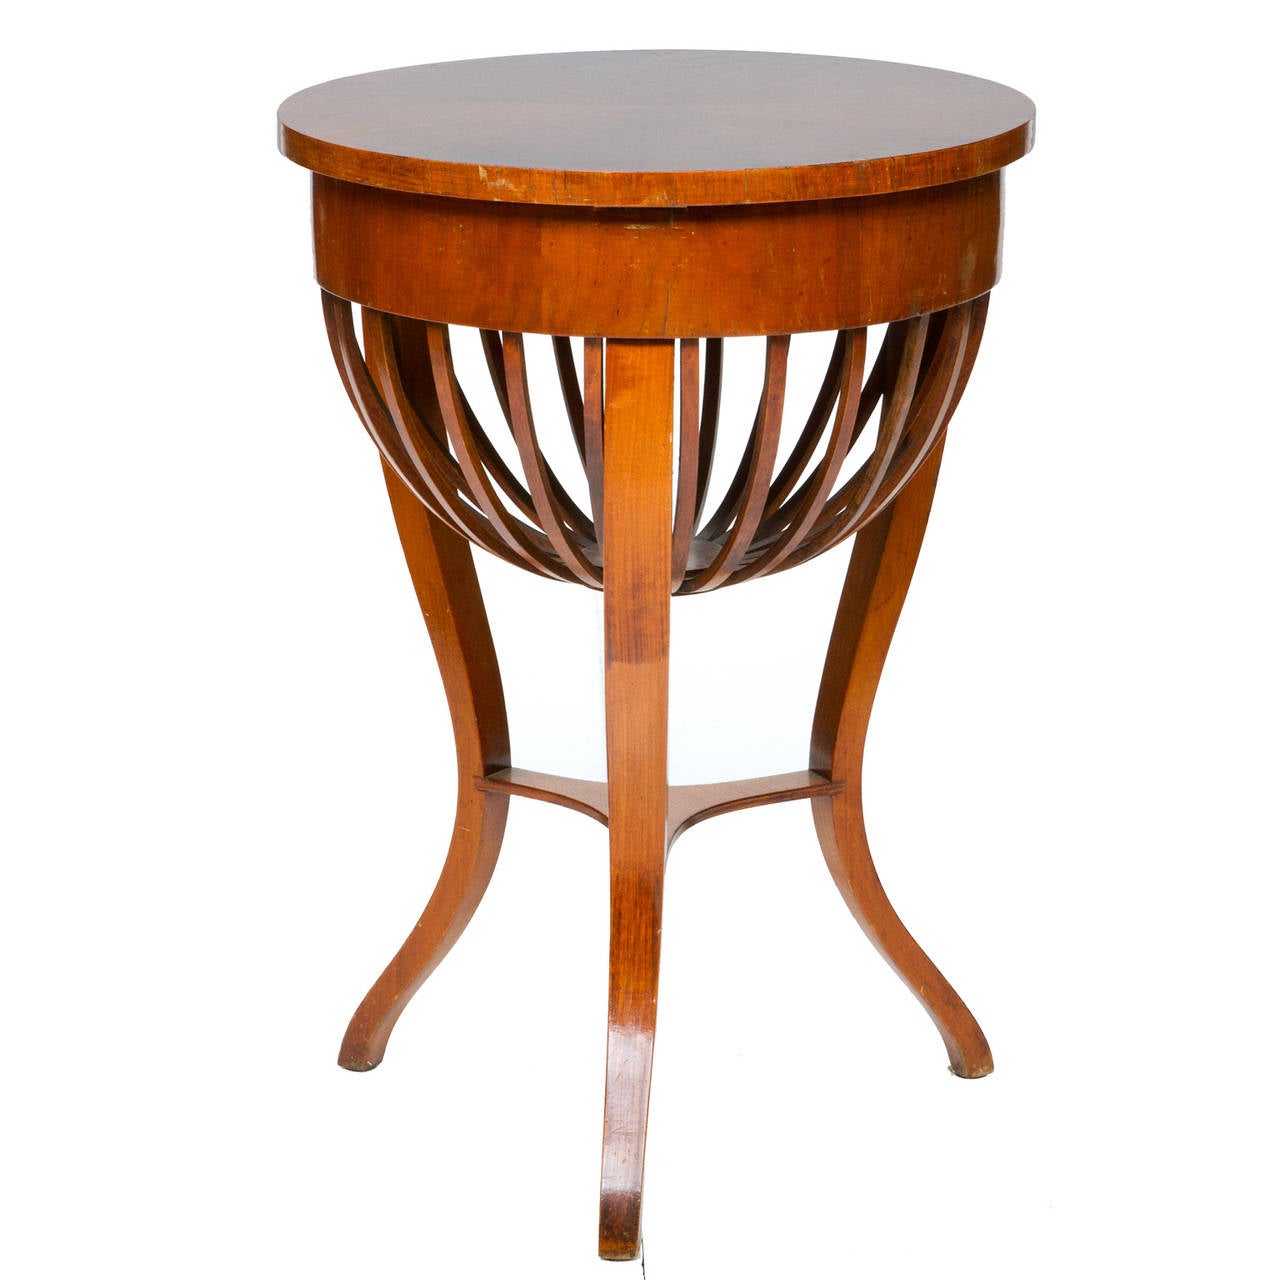 An unusual Italian work table with lift top revealing a fitted interior. The round top would make a functional side table with the basket undercarriage giving a unique look. Made of walnut and a wonderful patina this table is a unique find. The